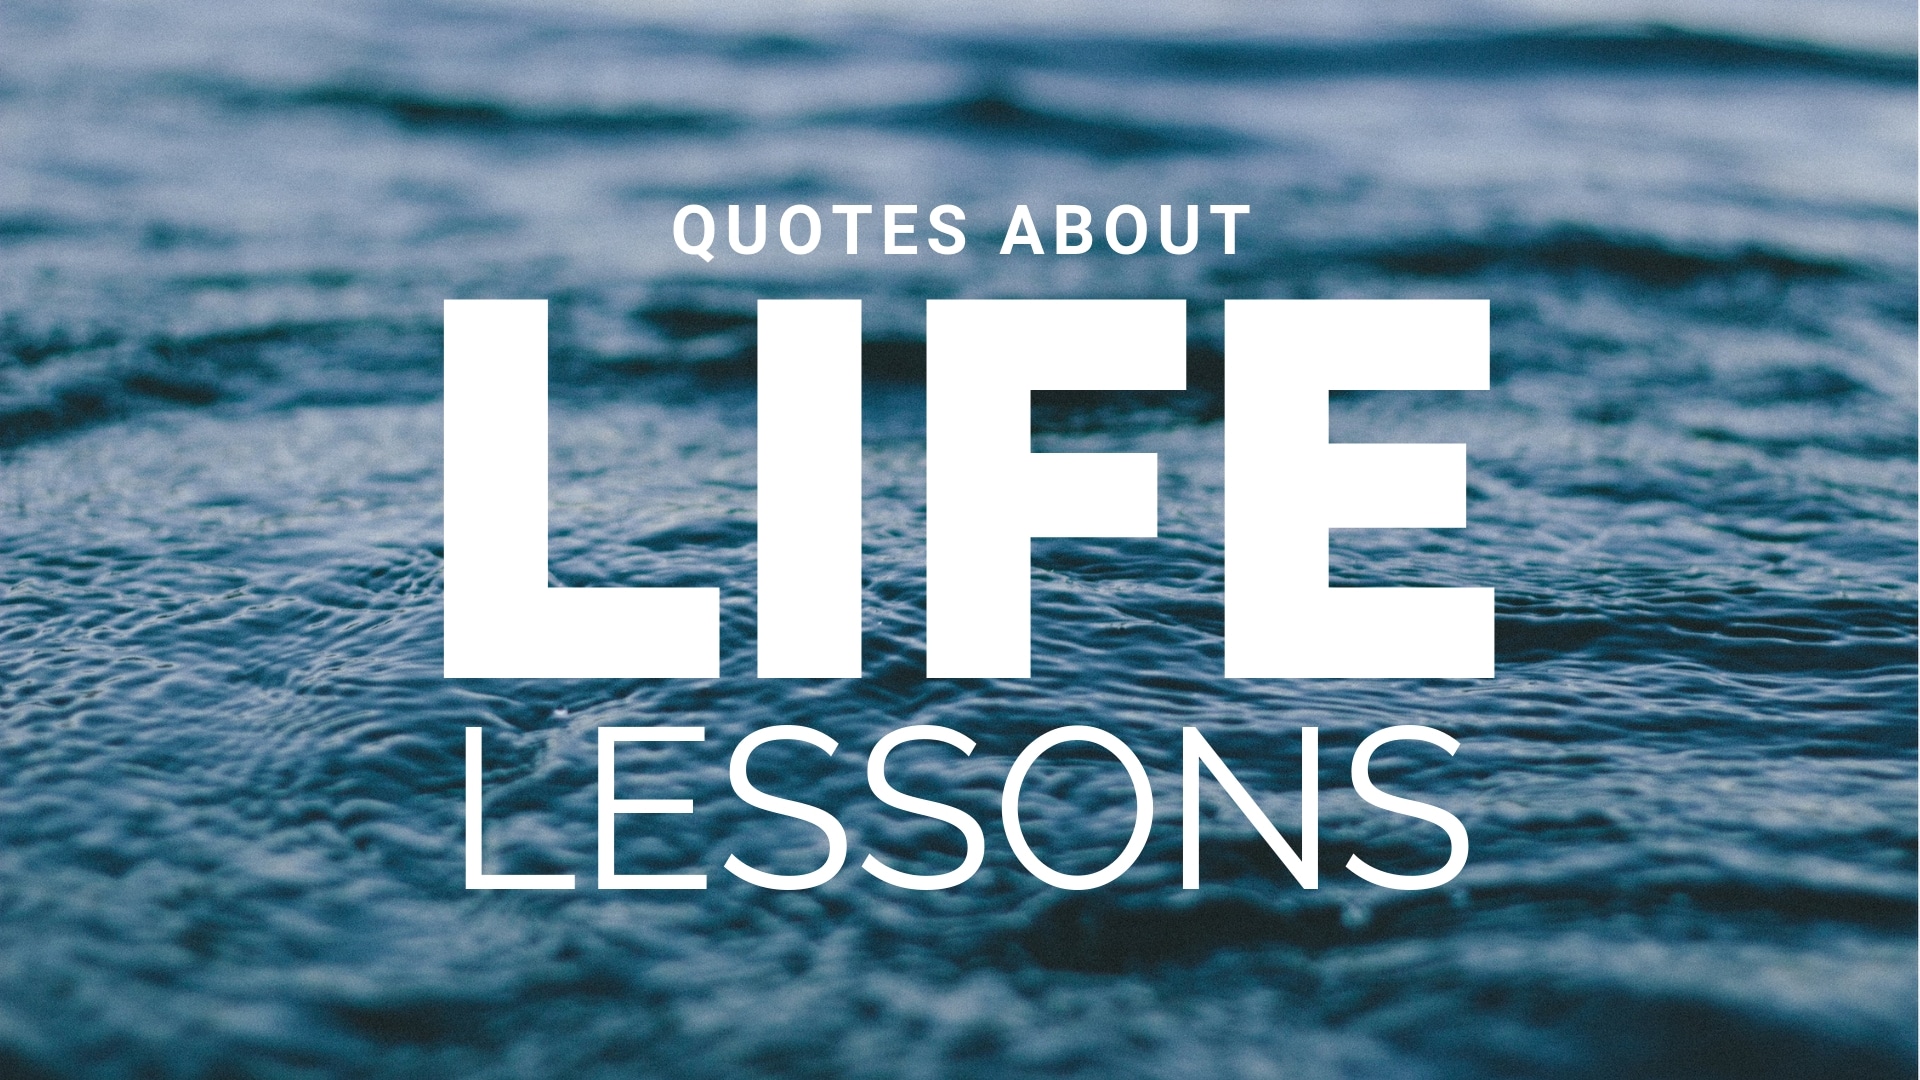 quotes about life lessons